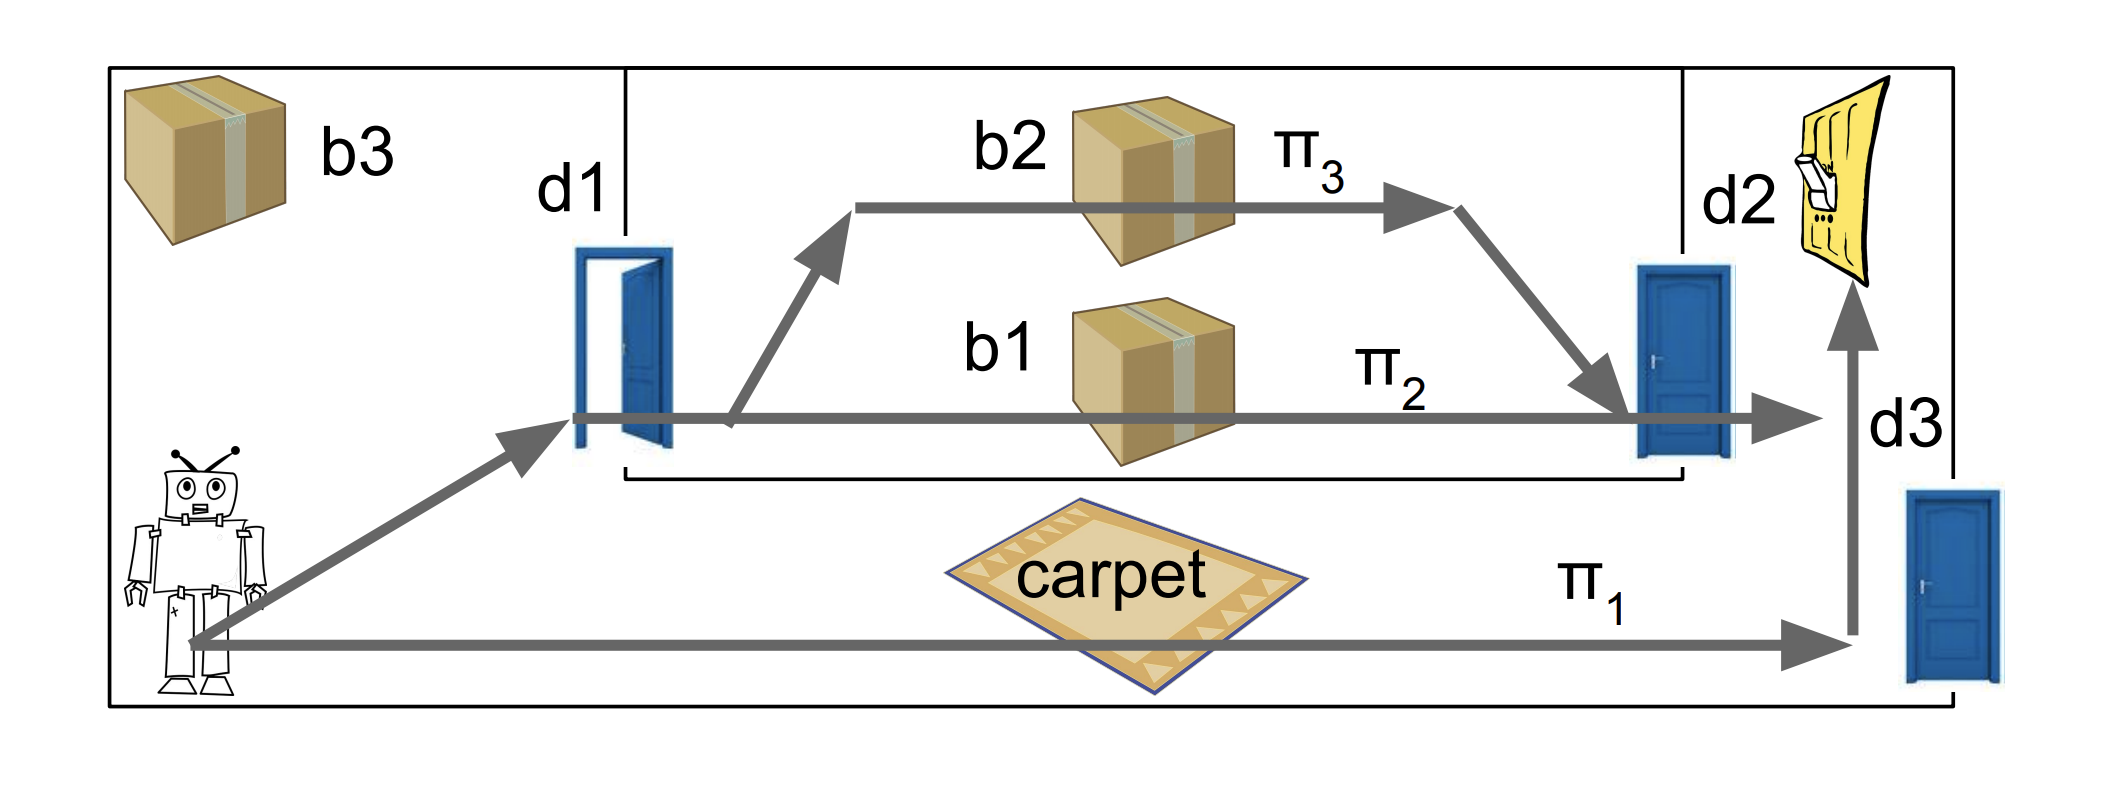 Diagram of a robot in a room